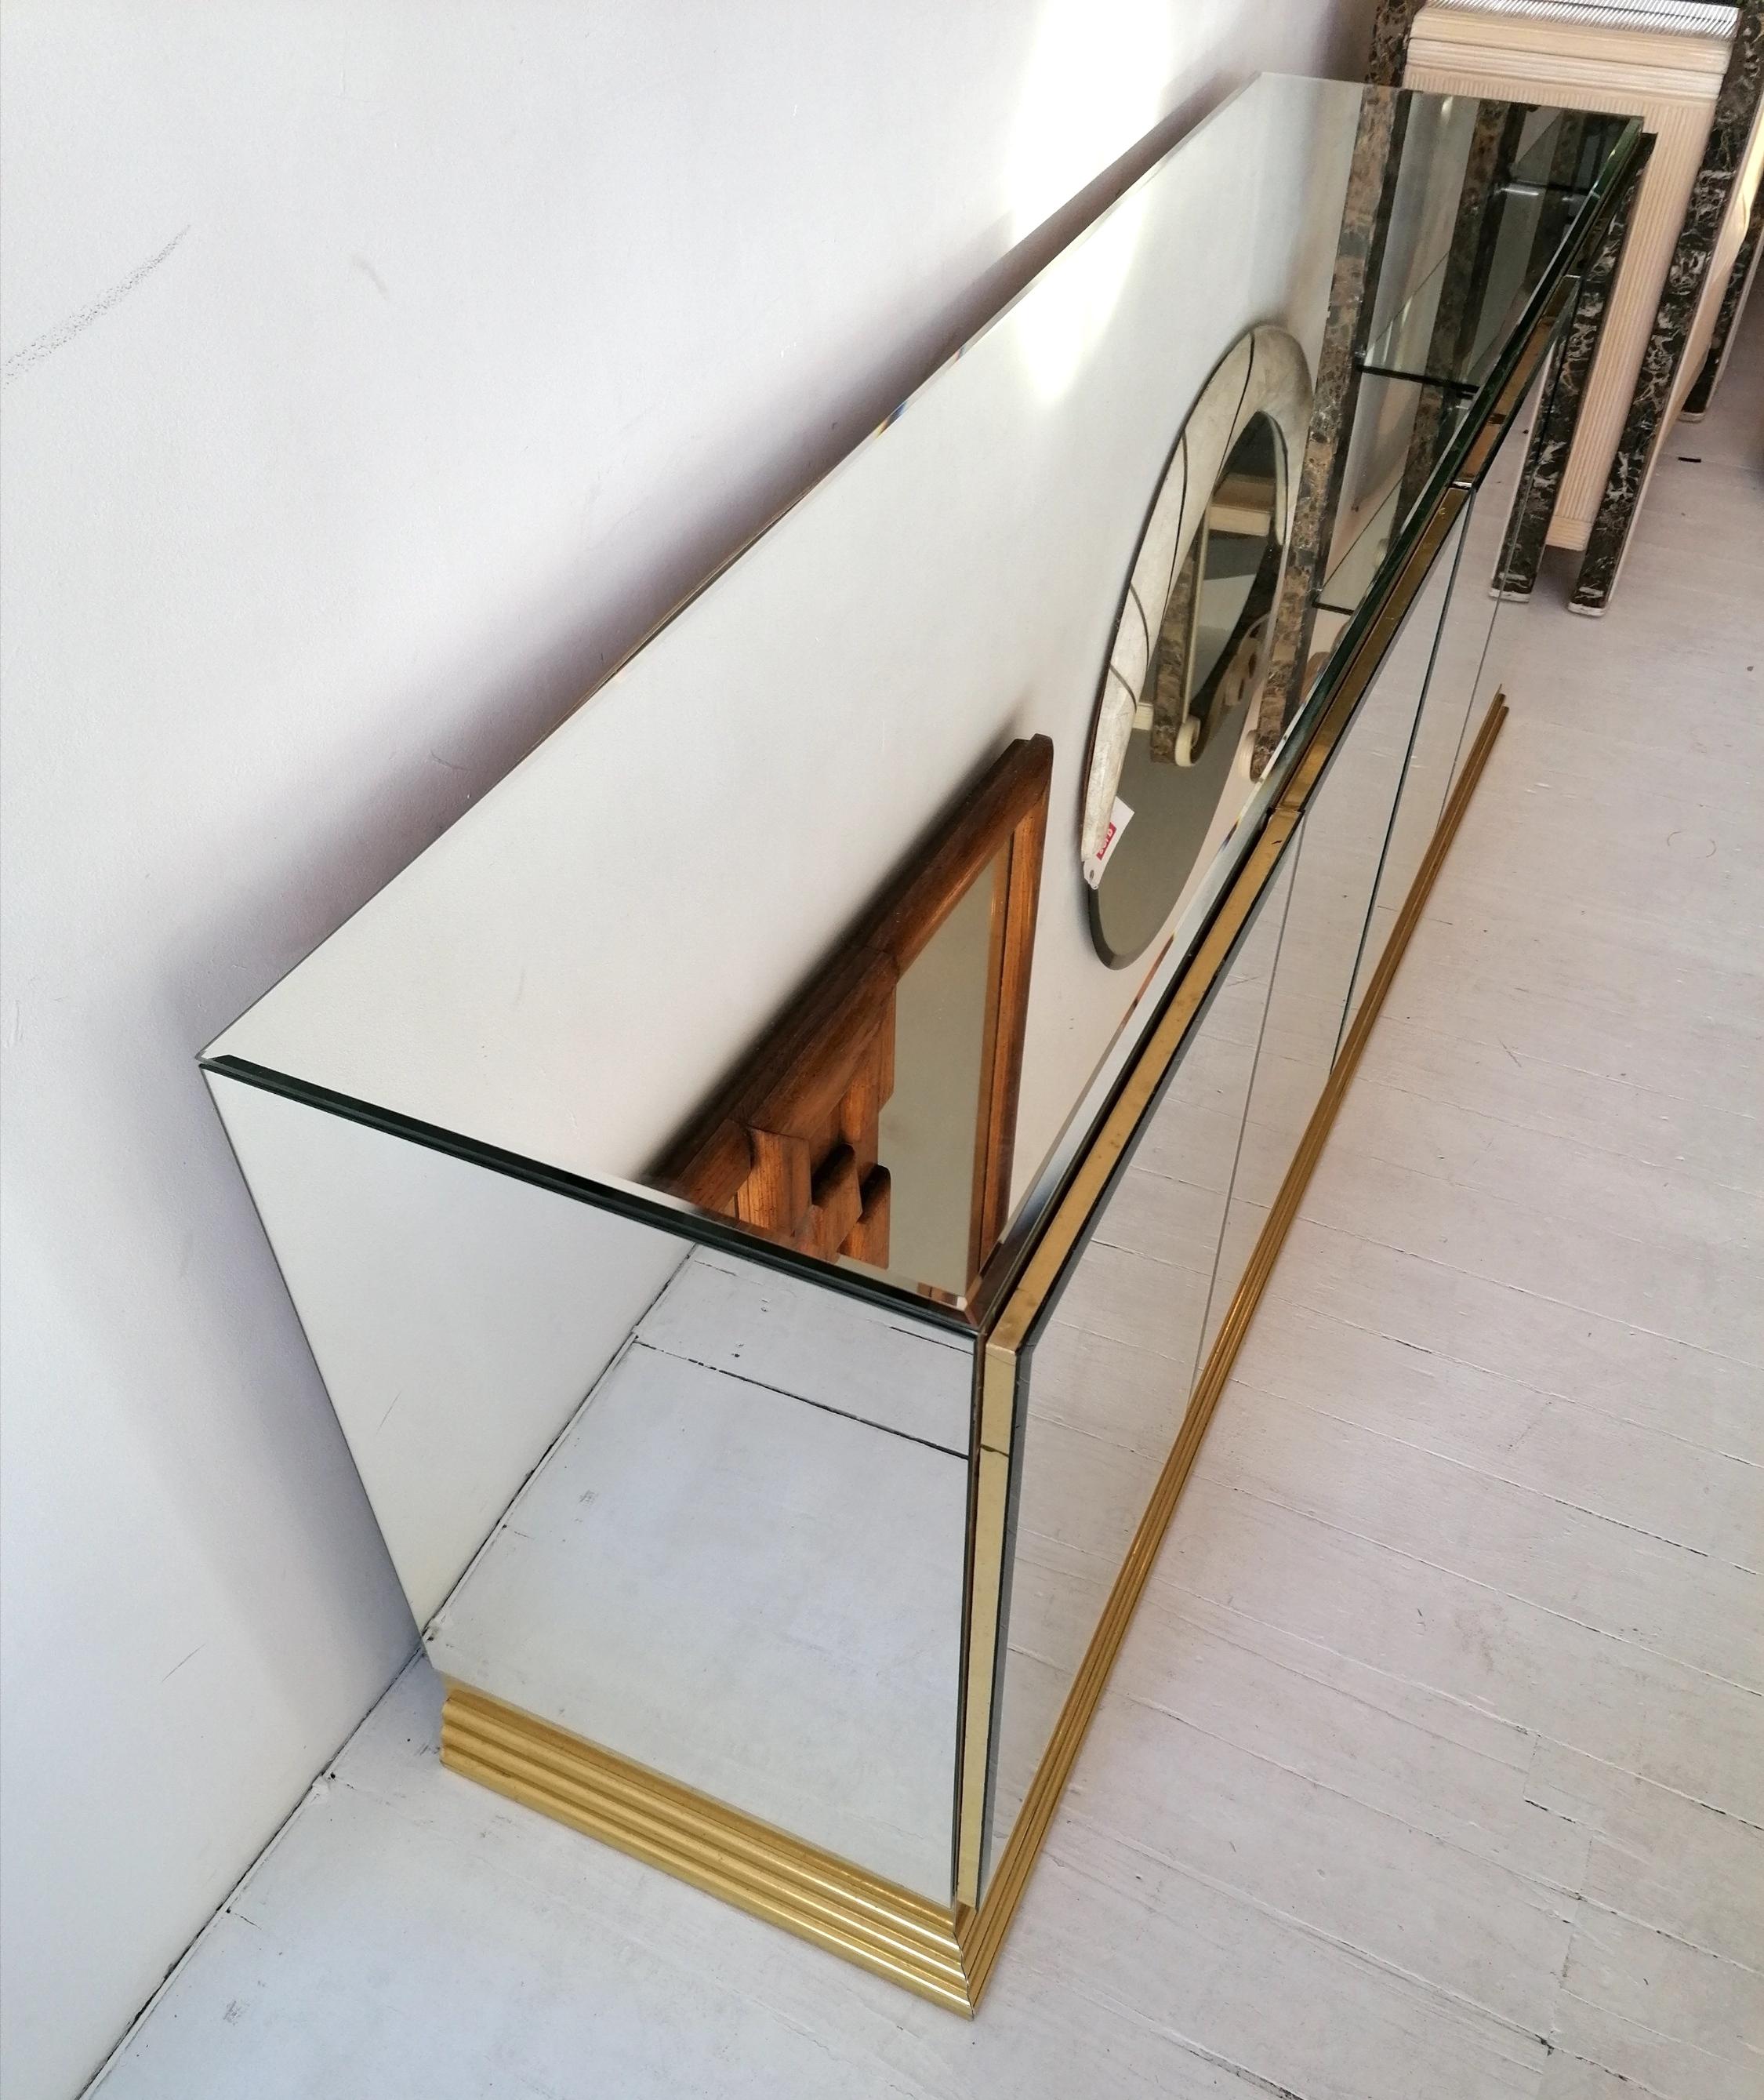 Vintage Mirrored Sideboard with Brass Base, by Ello Furniture USA, 1970s / 80s 4